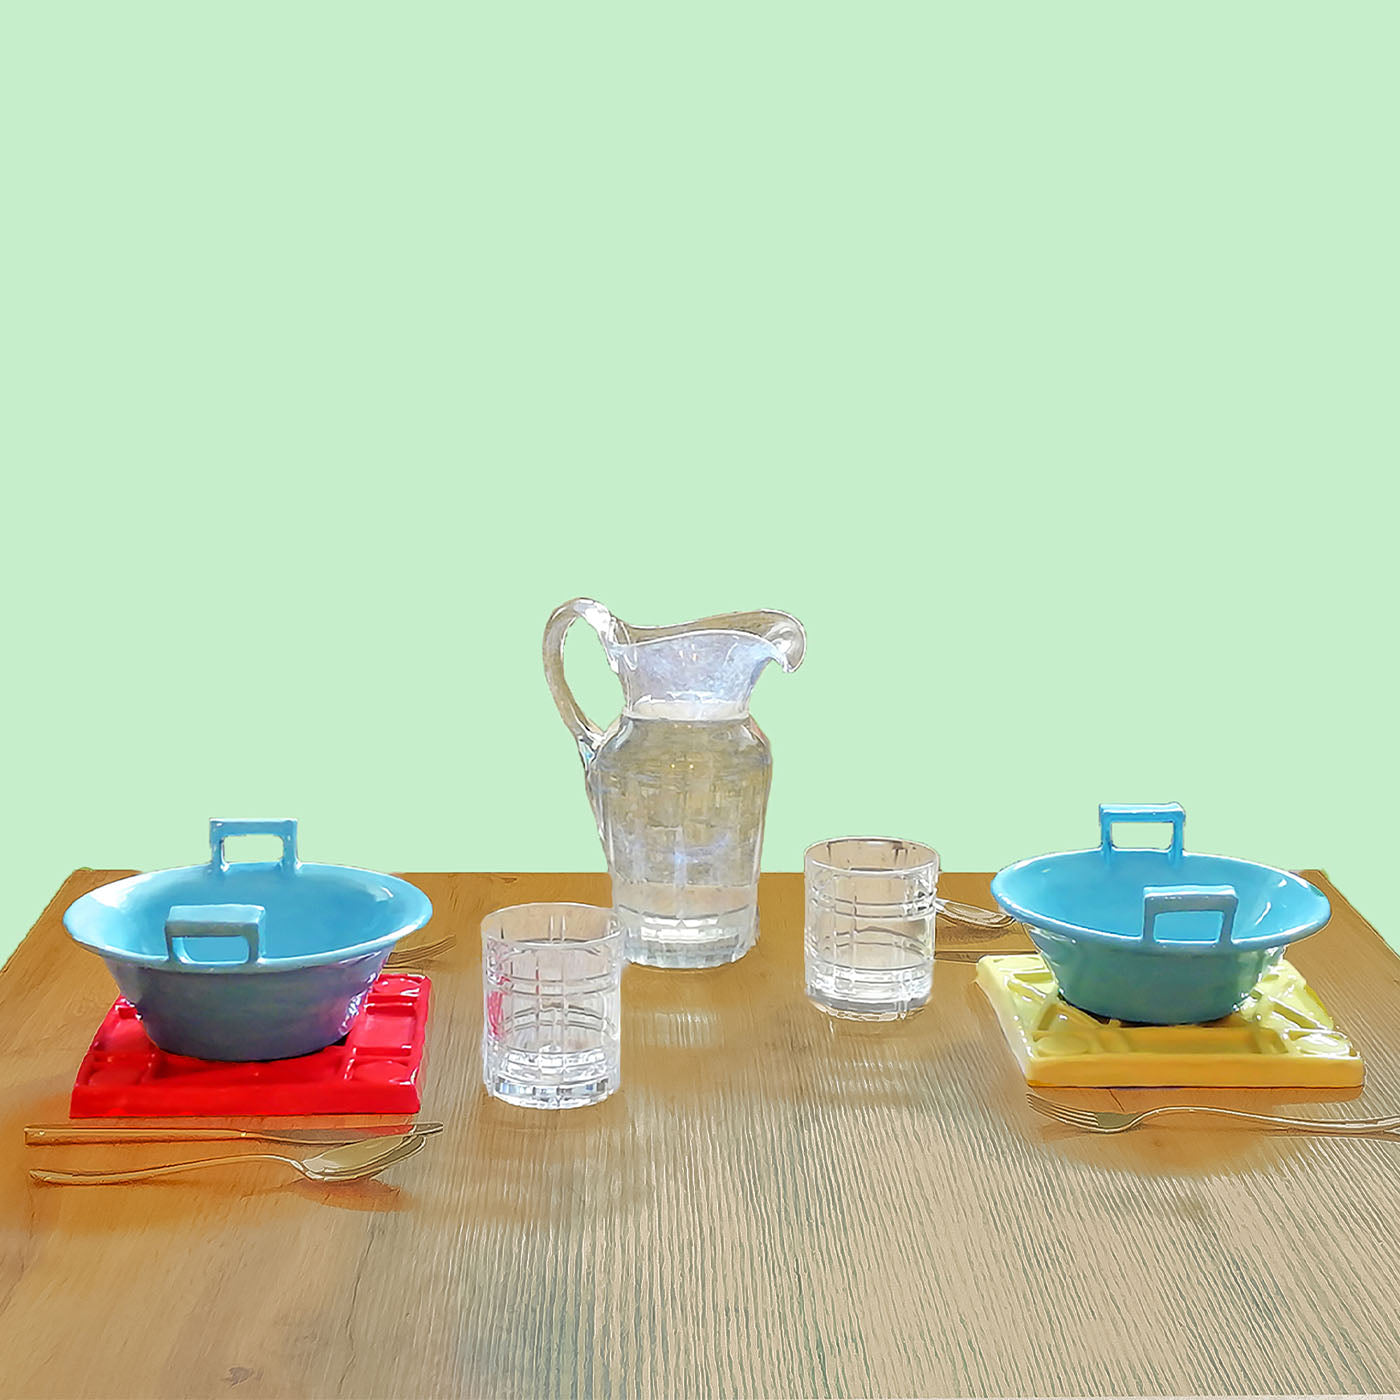 Cofana Set of Blue Soup Plate and Yellow Charger Plate - Alternative view 1